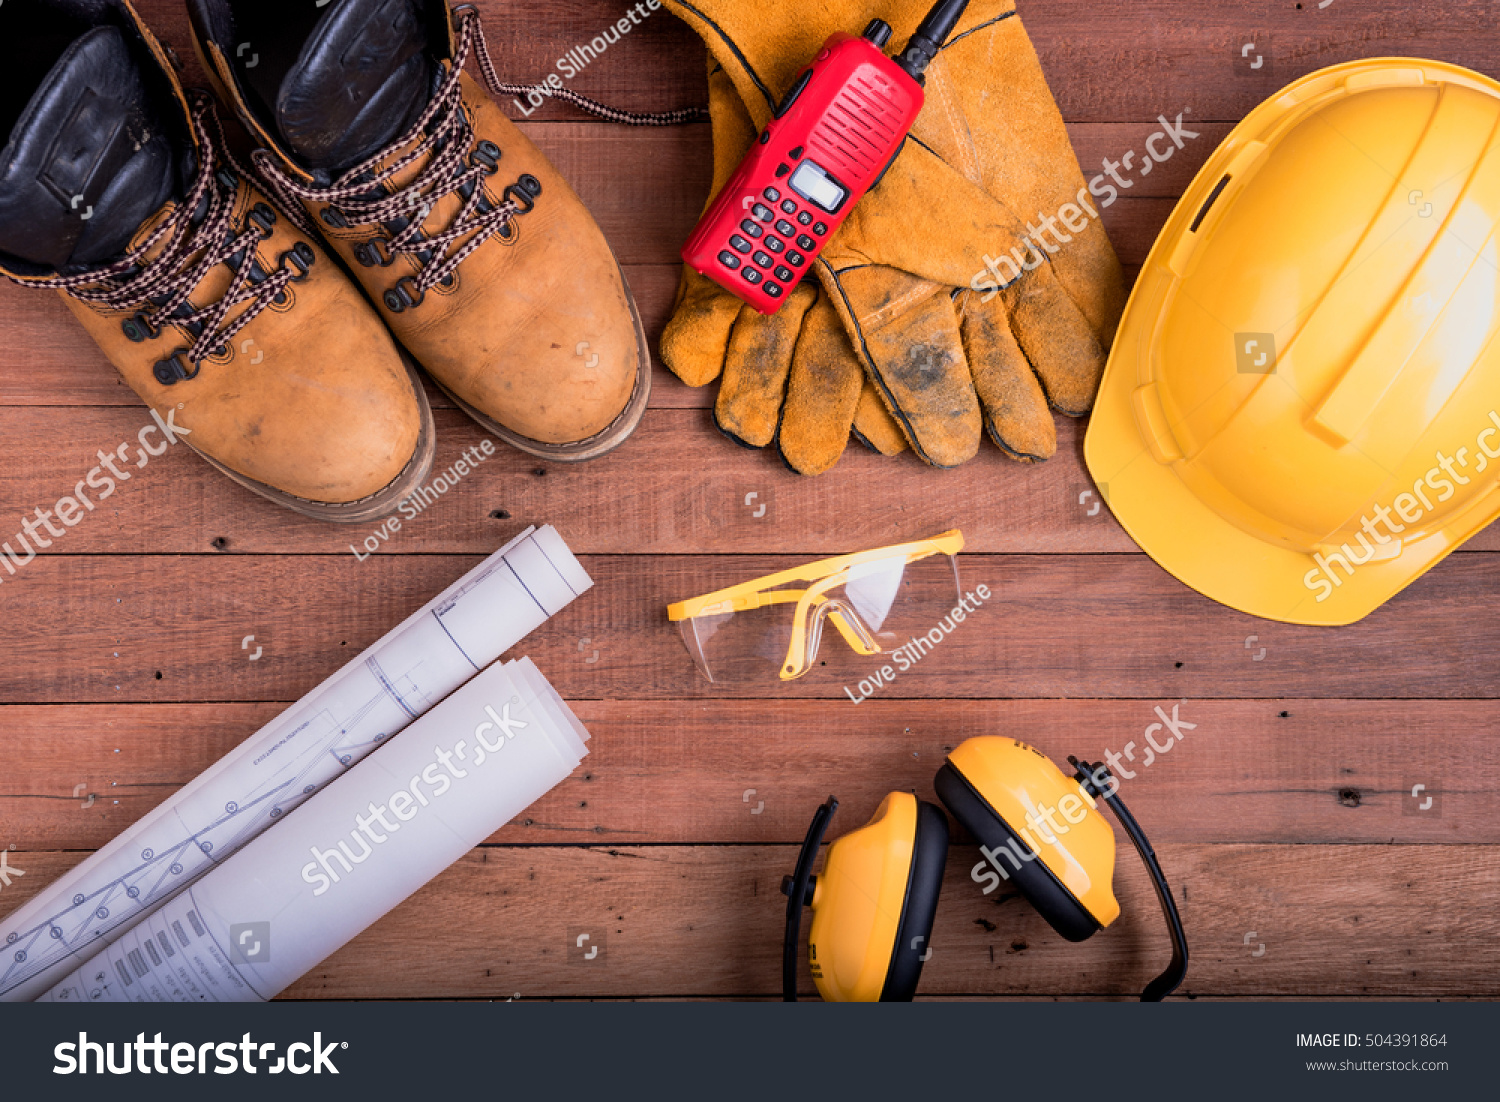 safety equipment on wooden.Industrial construction concept, tools #504391864